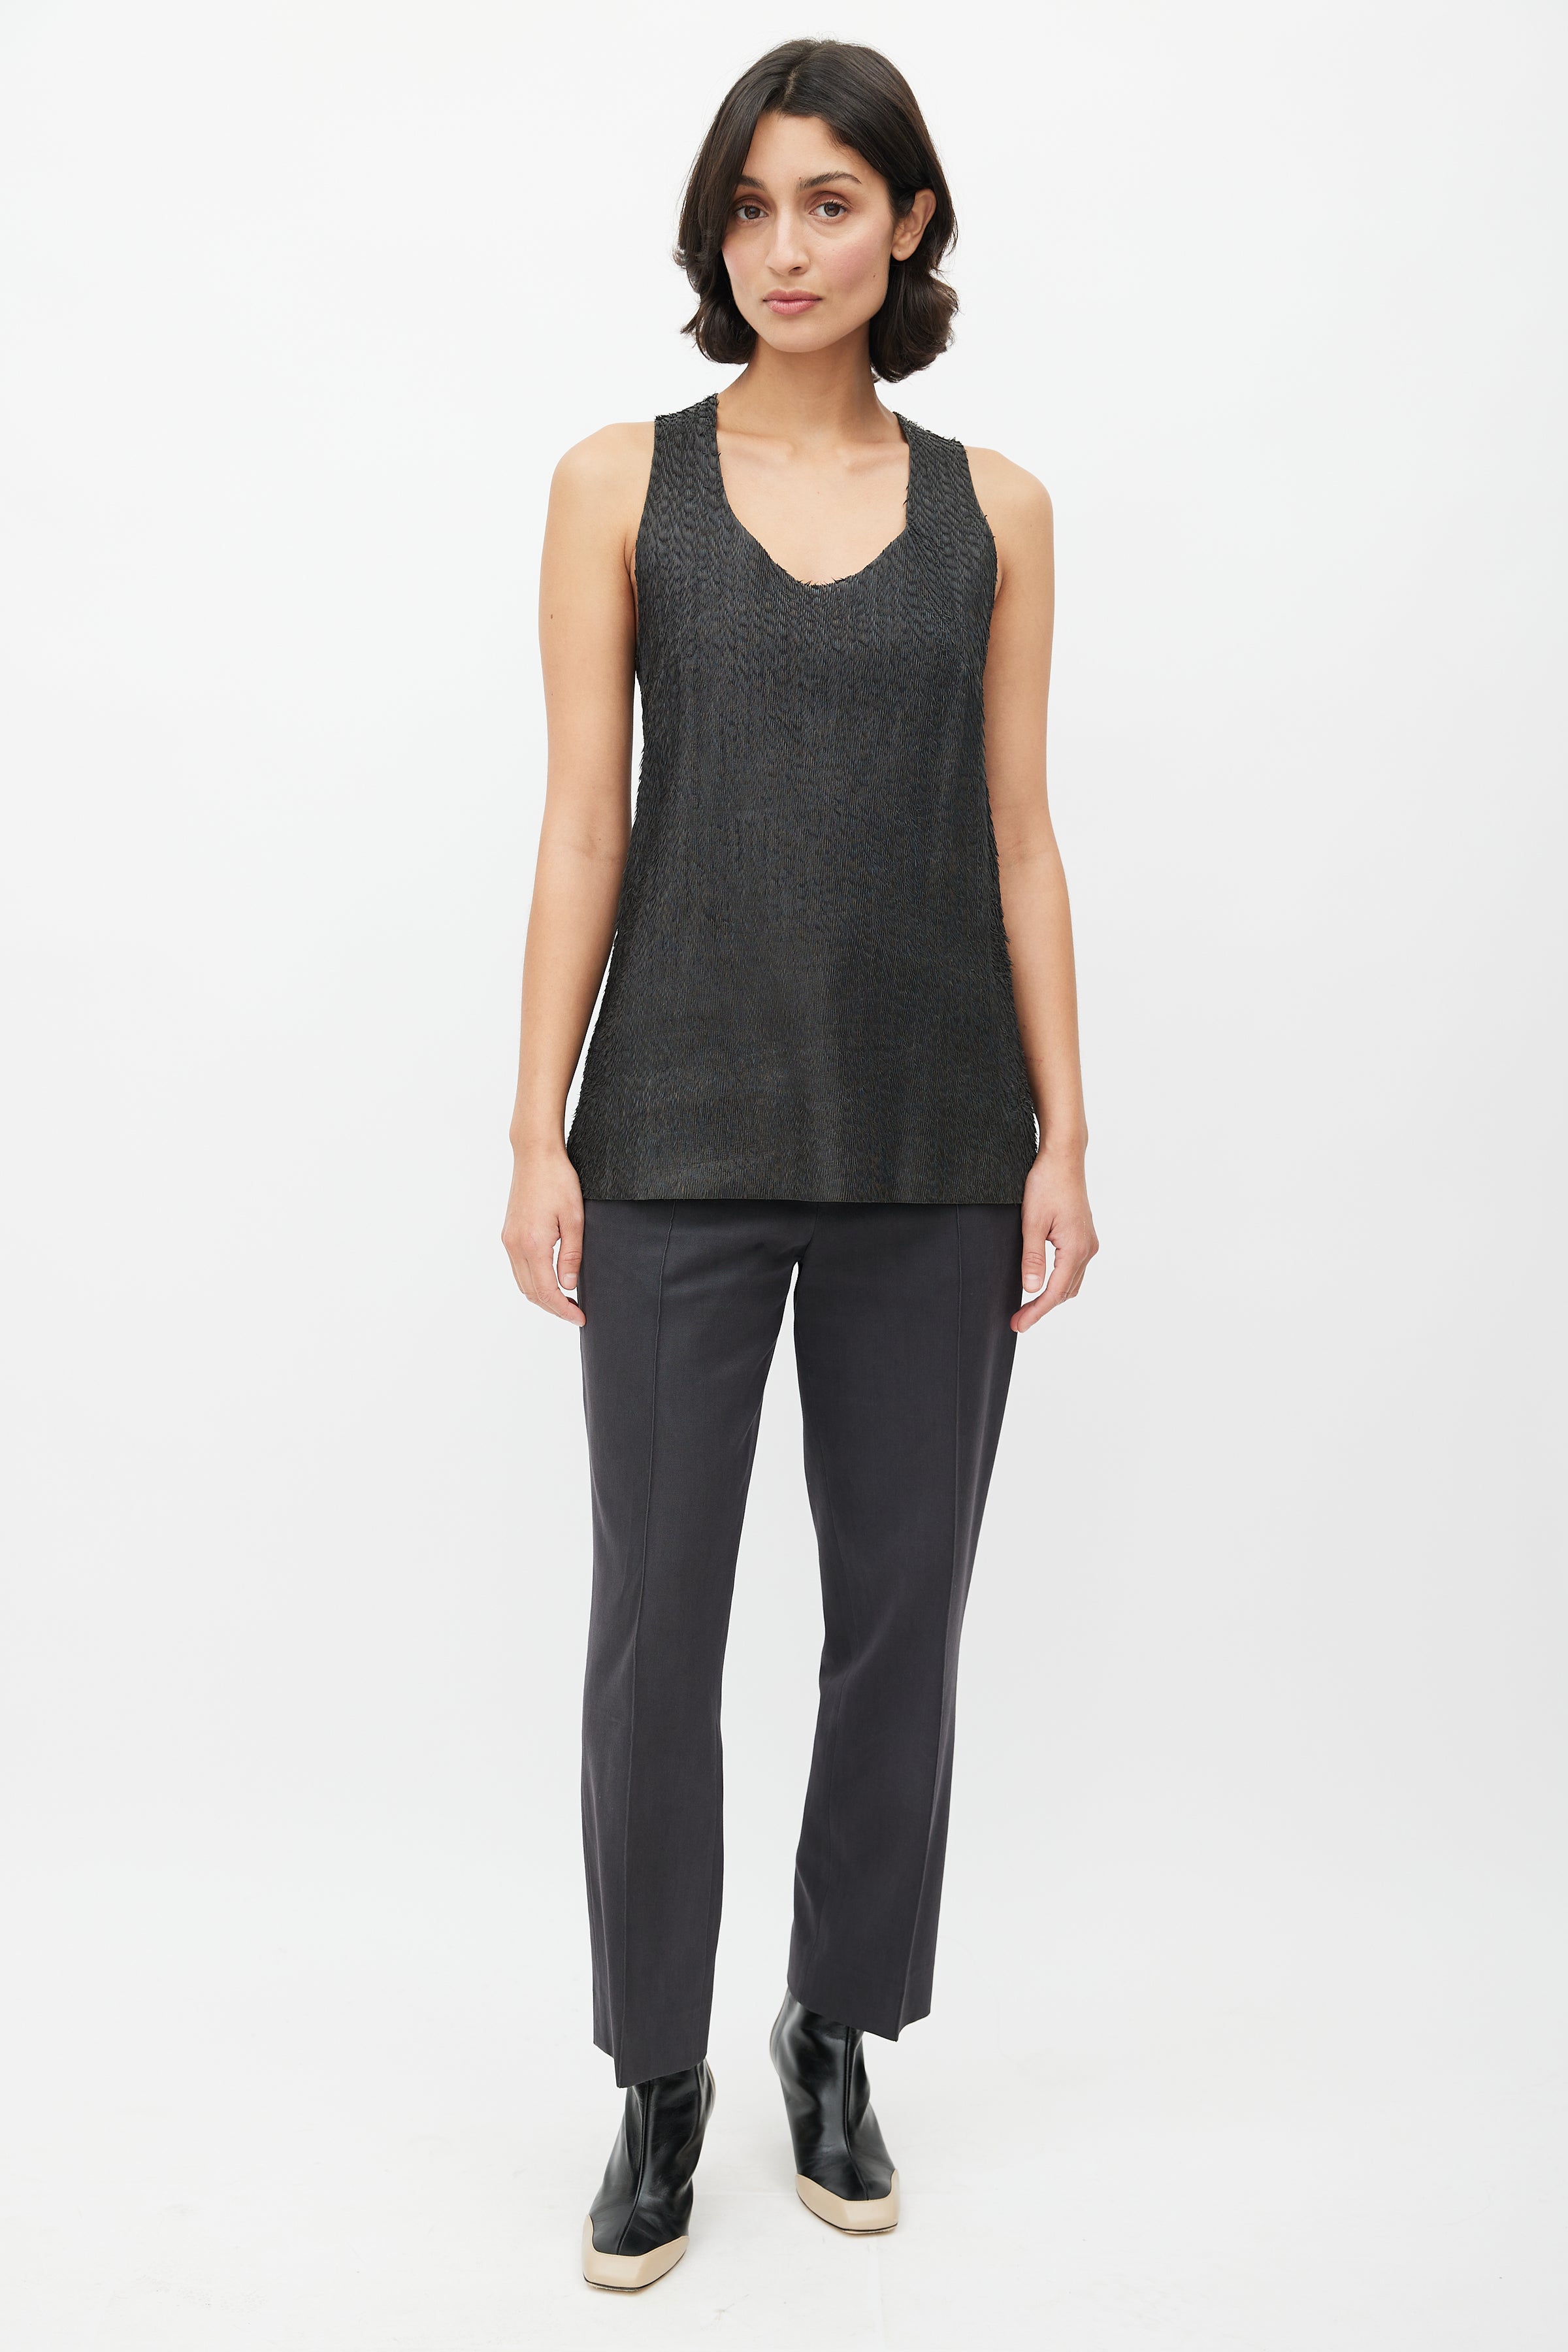 Celine // Black Textured Leather Top – VSP Consignment